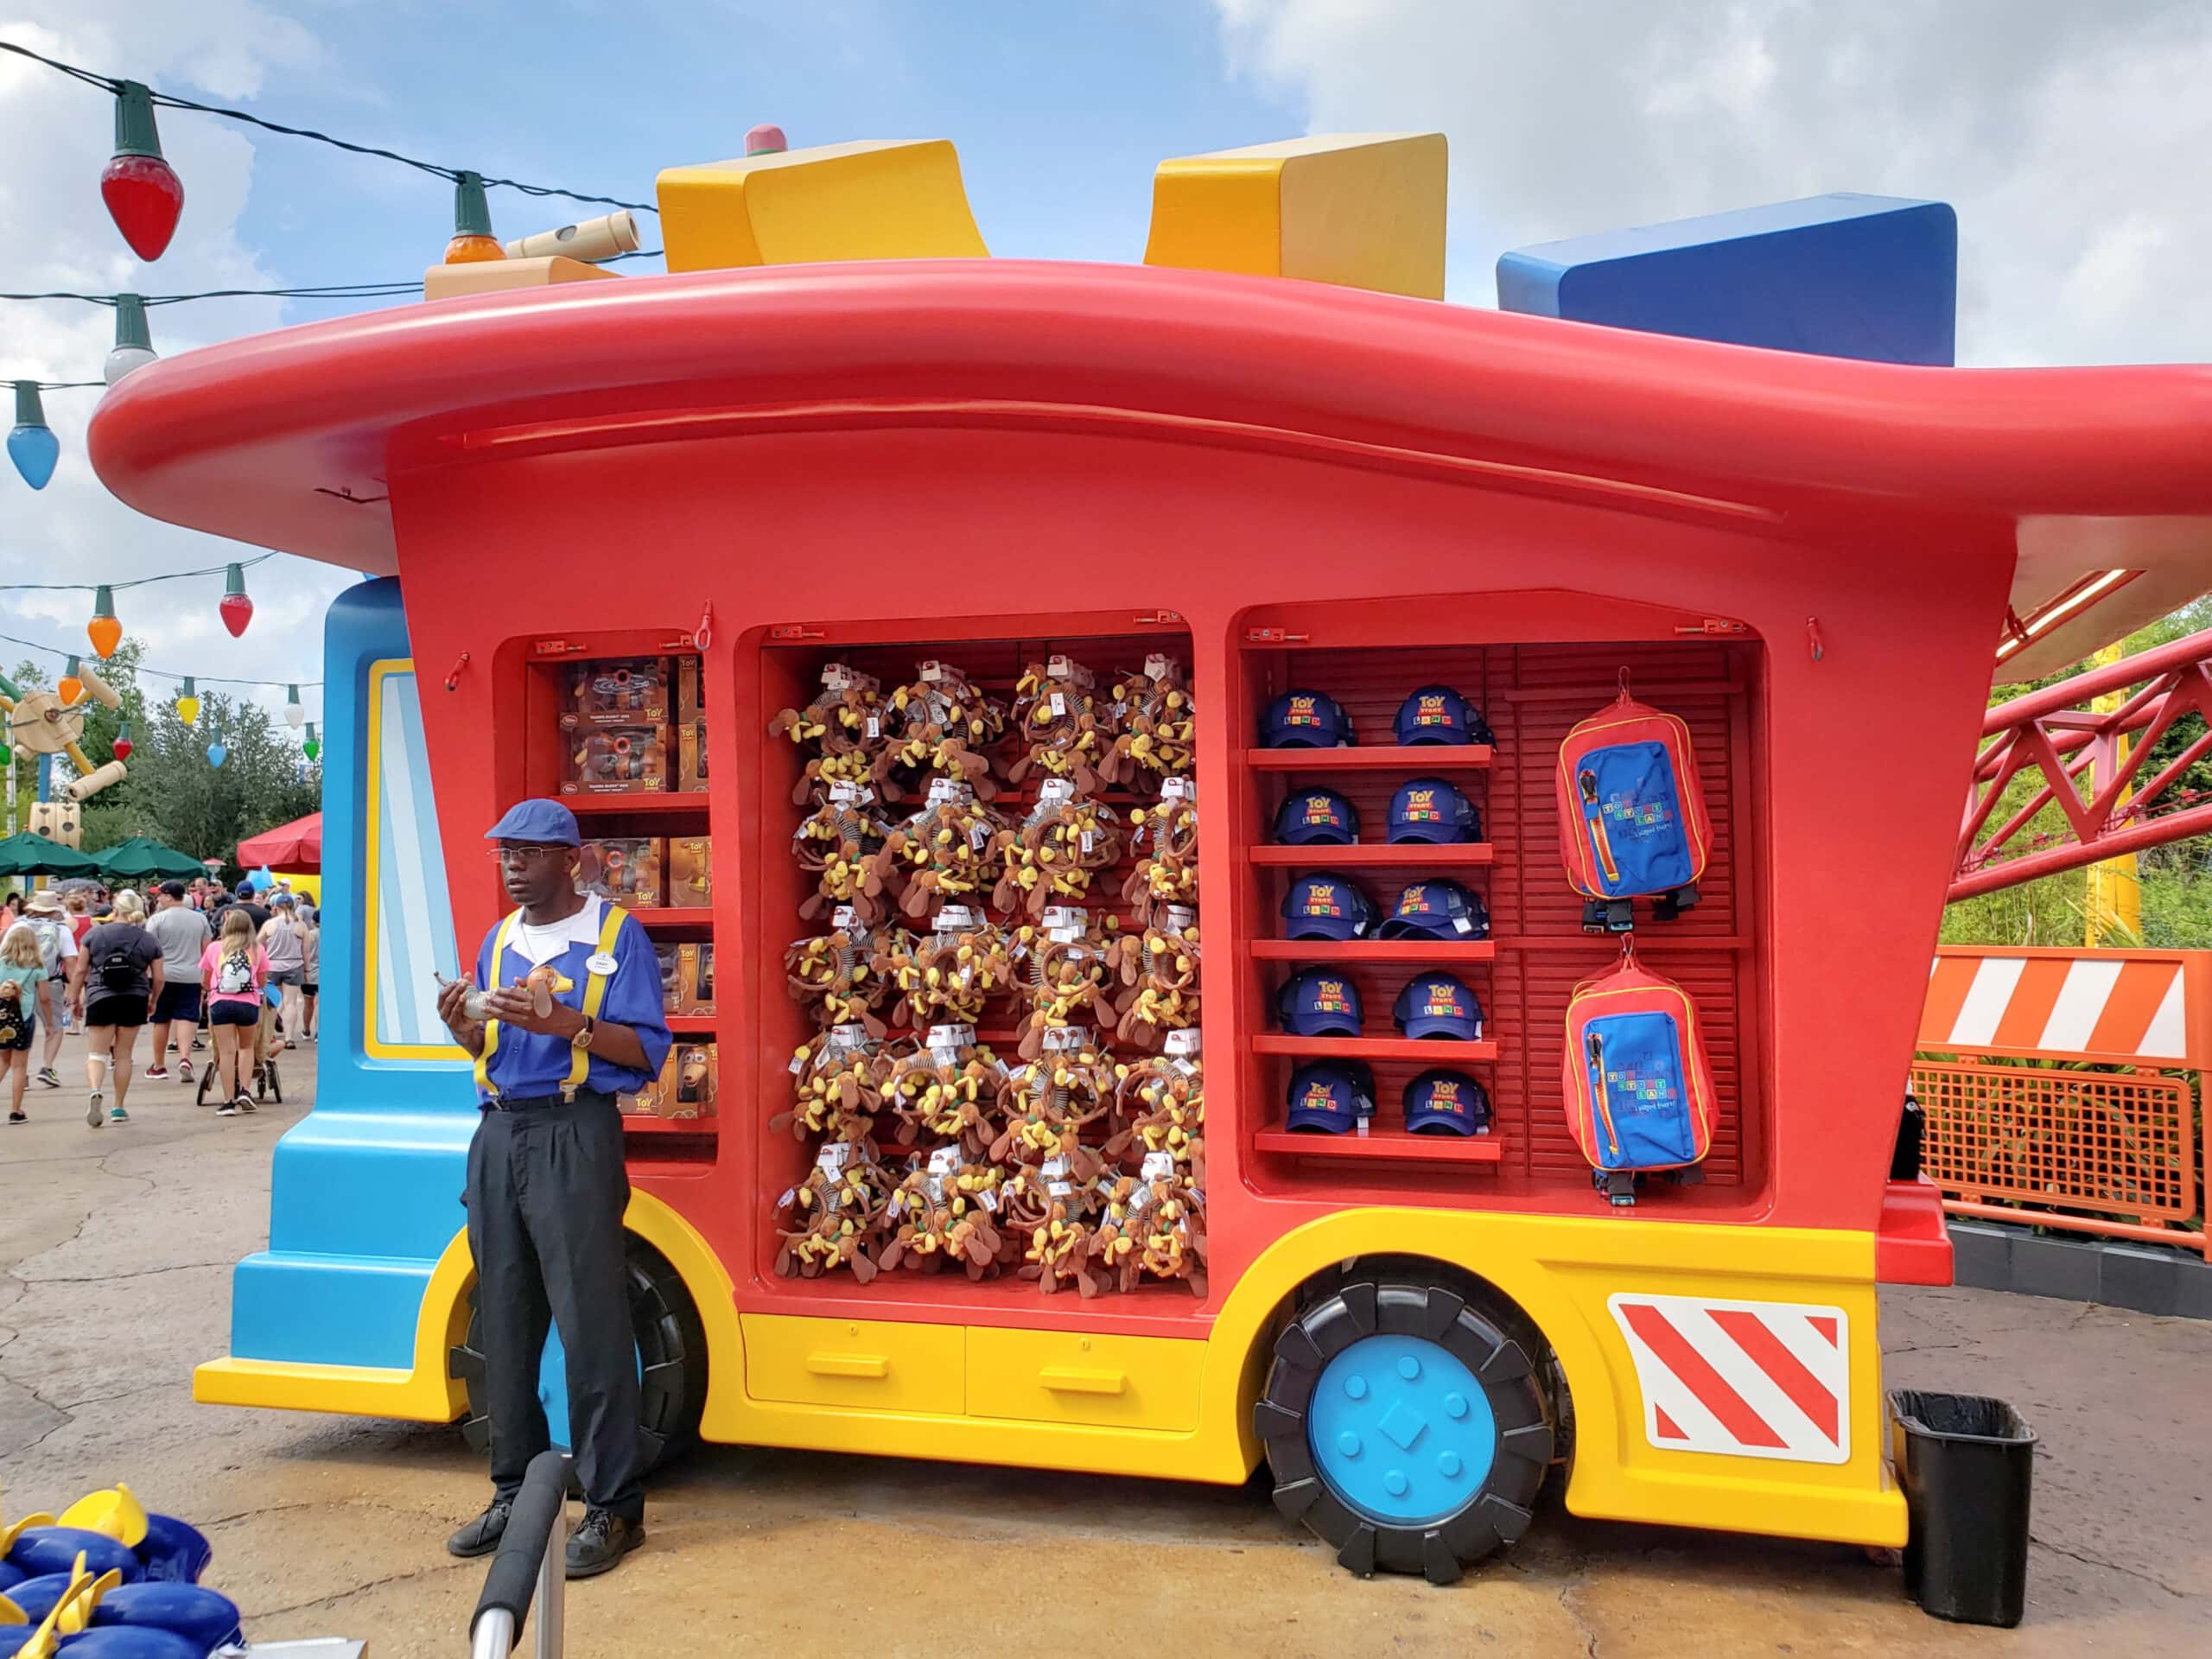 Merchandise cart at Toy Story Land